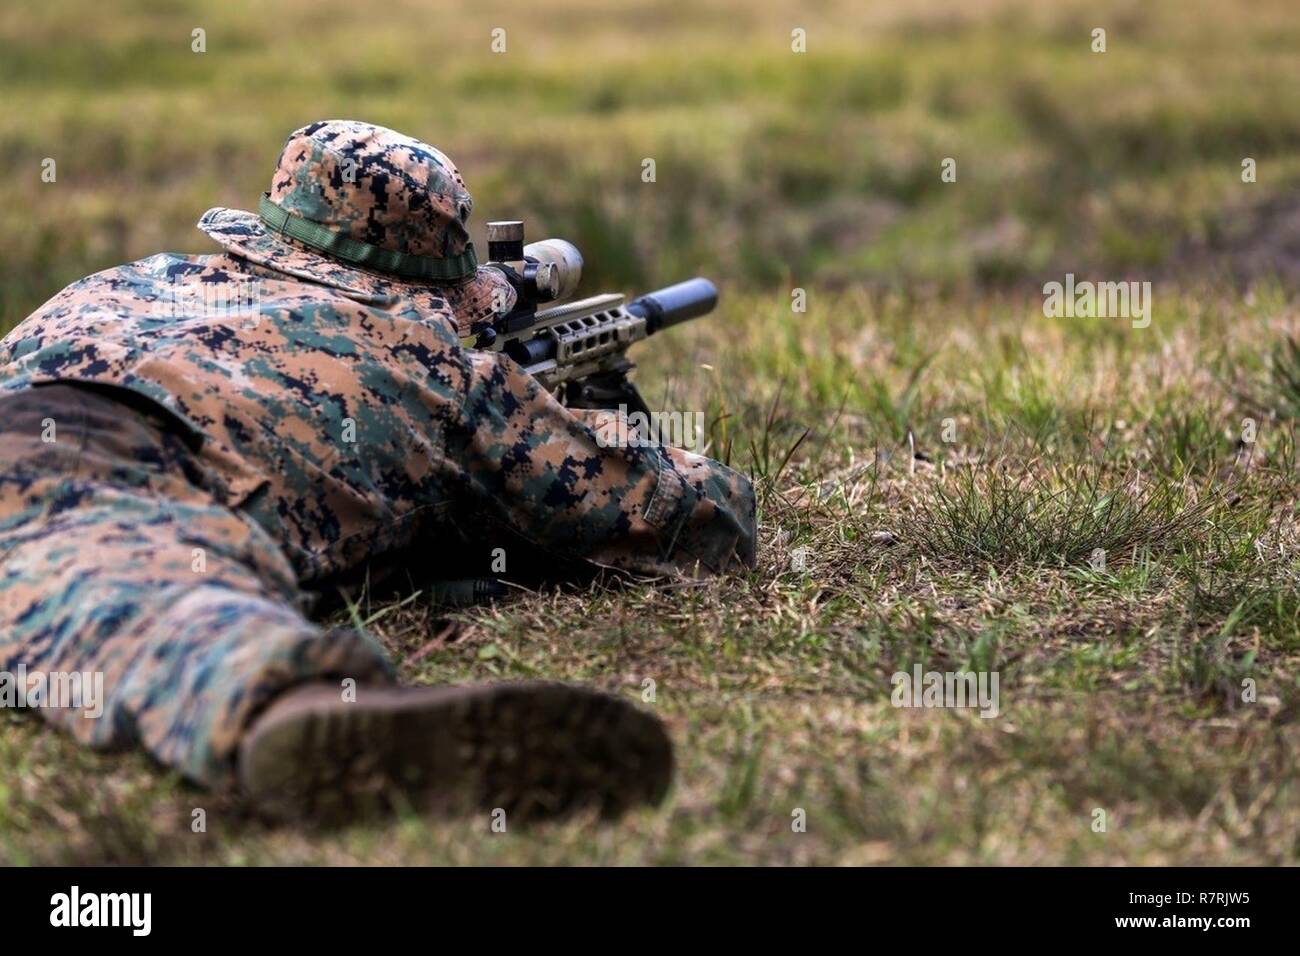 A Marine aims down the scope of an M40A6 rifle during an urban sniper course at Camp Lejeune, N.C., March 30, 2017. The Marines practiced engaging targets from unknown distances to maintain their skills on the weapon. The course, taught by Expeditionary Operations Training Group, includes Marines from 2nd Battalion, 6th Marine Regiment, 2nd Reconnaissance Battalion and School of Infantry-East. Stock Photo